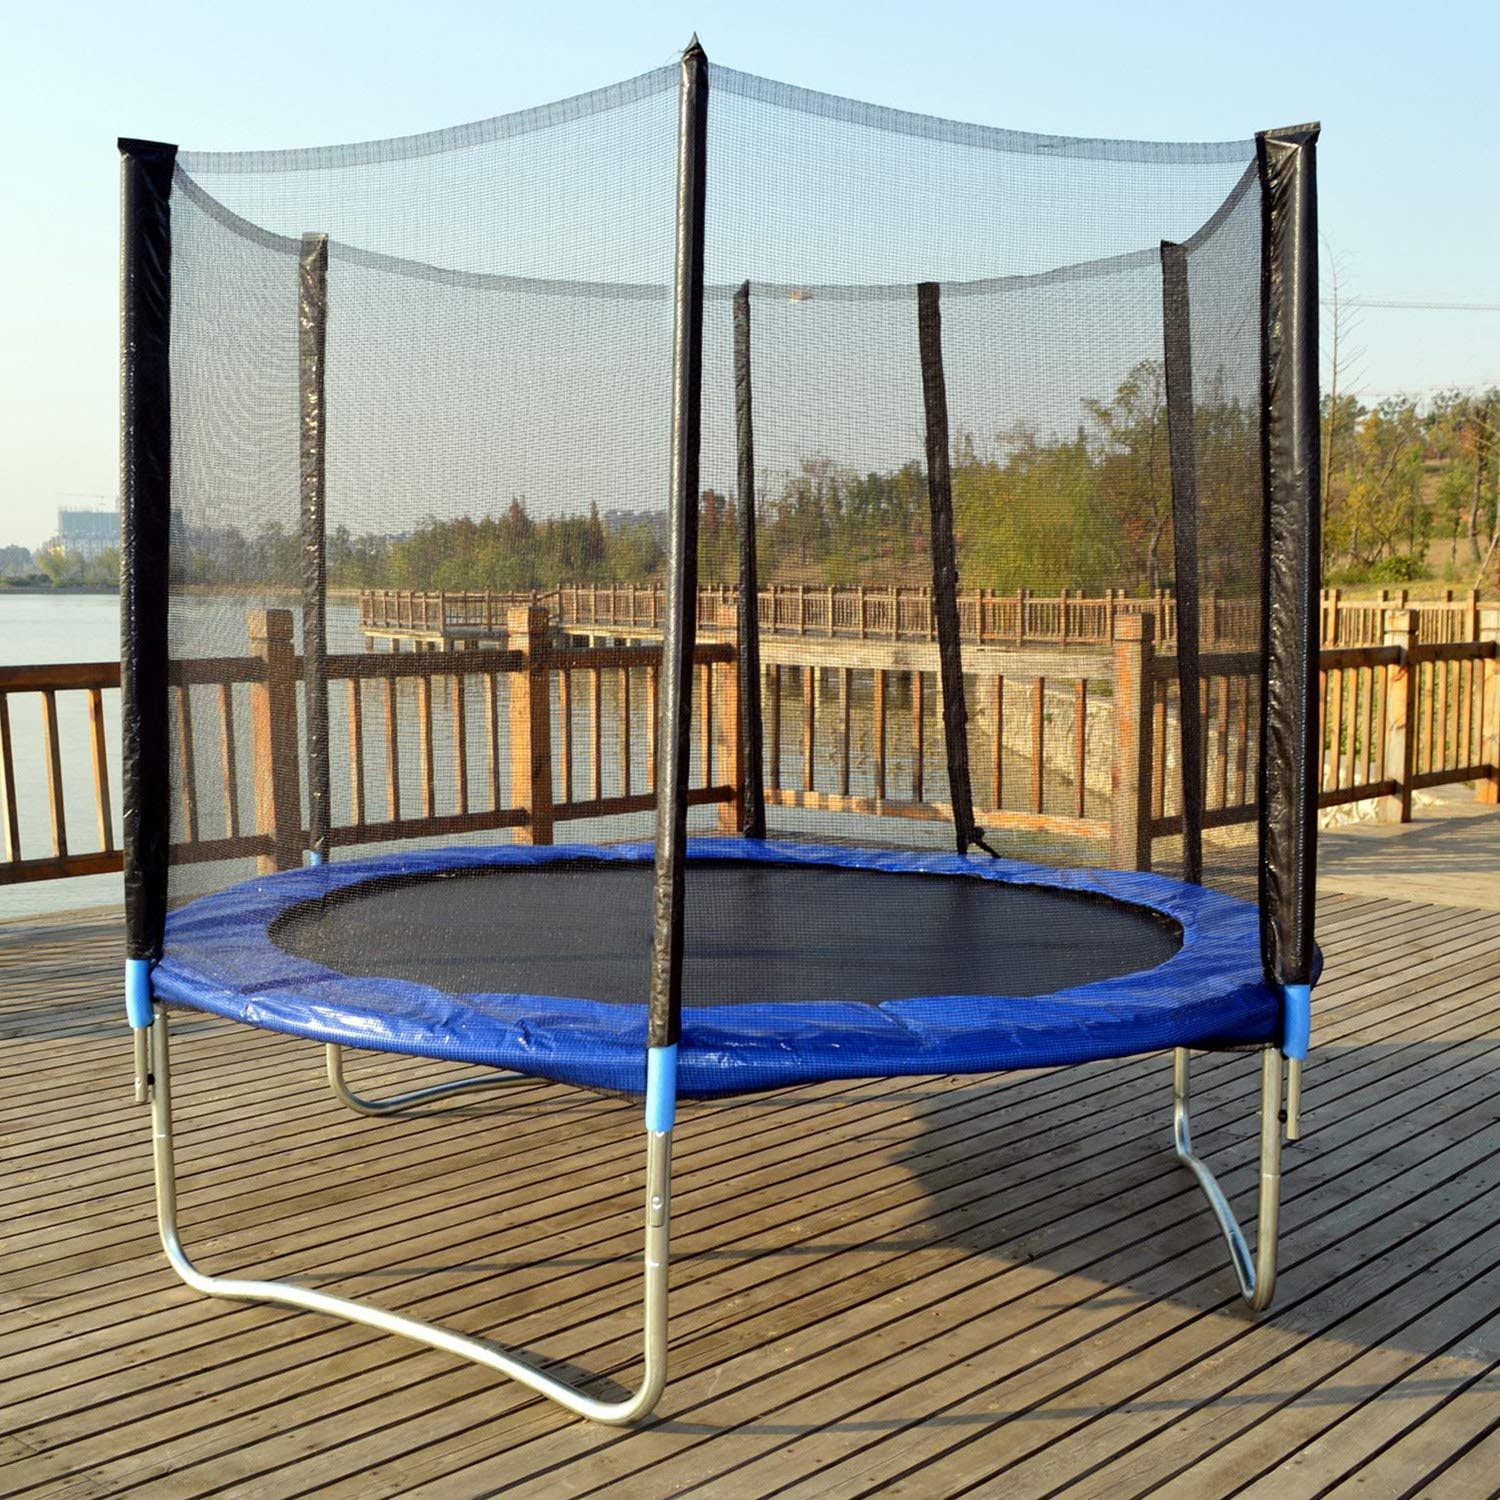 Bestmassage 10 ft Trampoline with Enclosure Net Outdoor Fitness Trampoline PVC Spring Cover